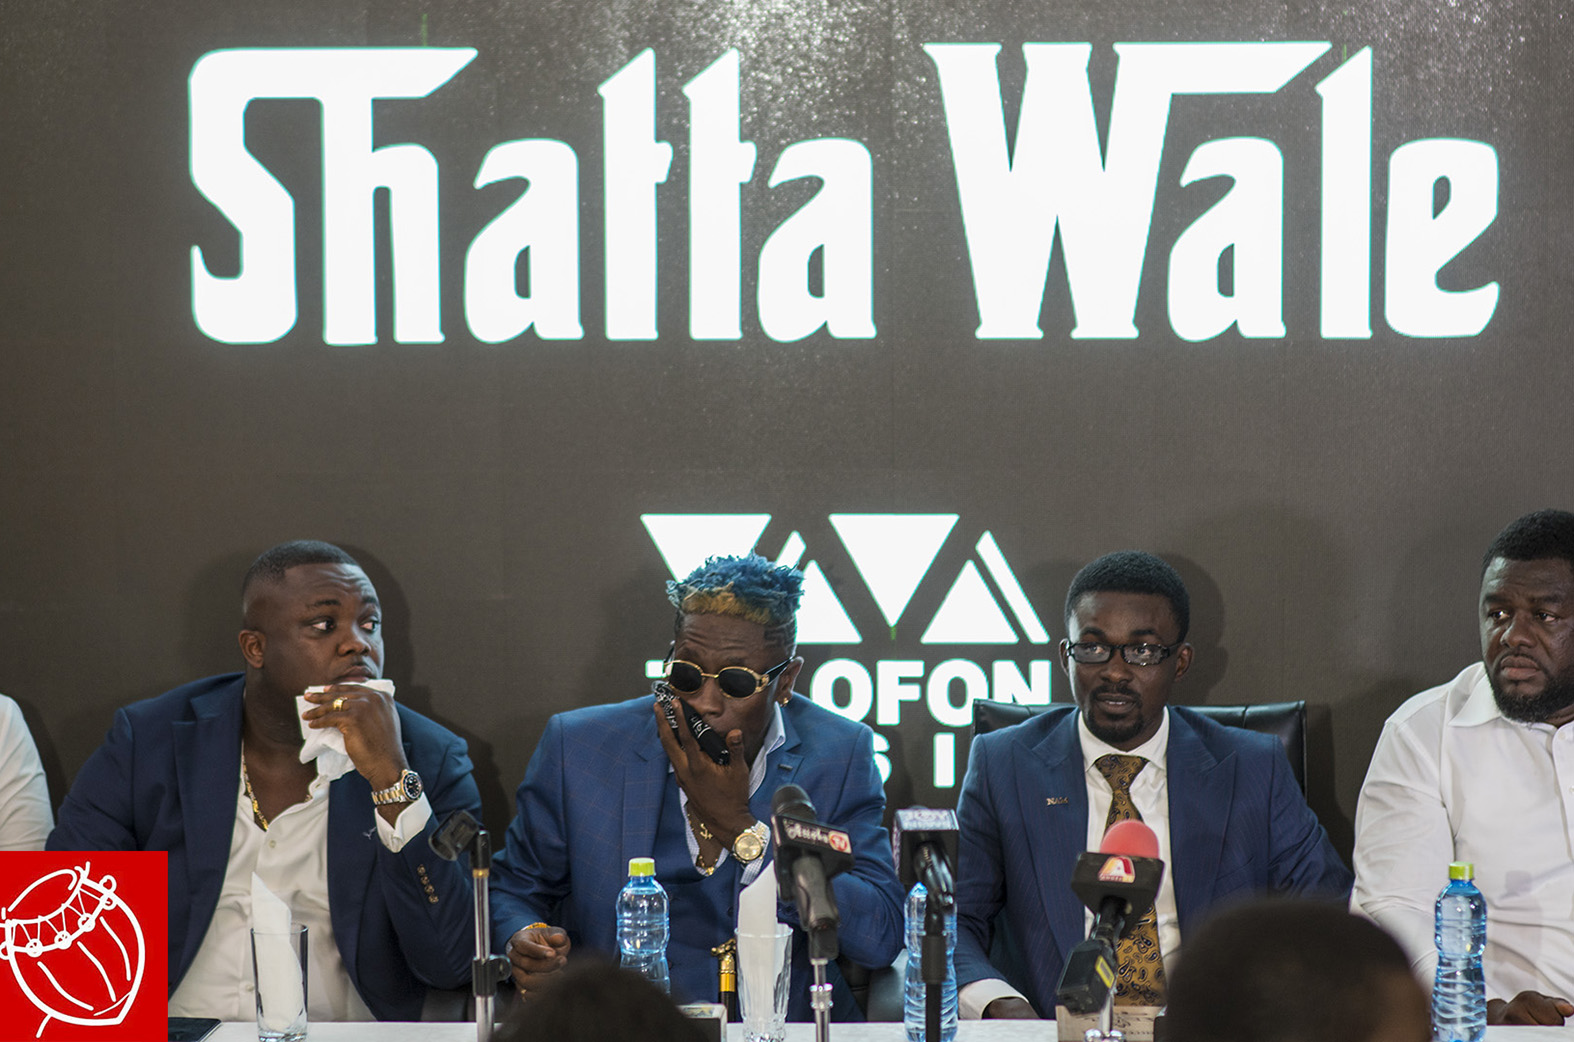 Shatta Wale signs 3years with Zylofon Music record label